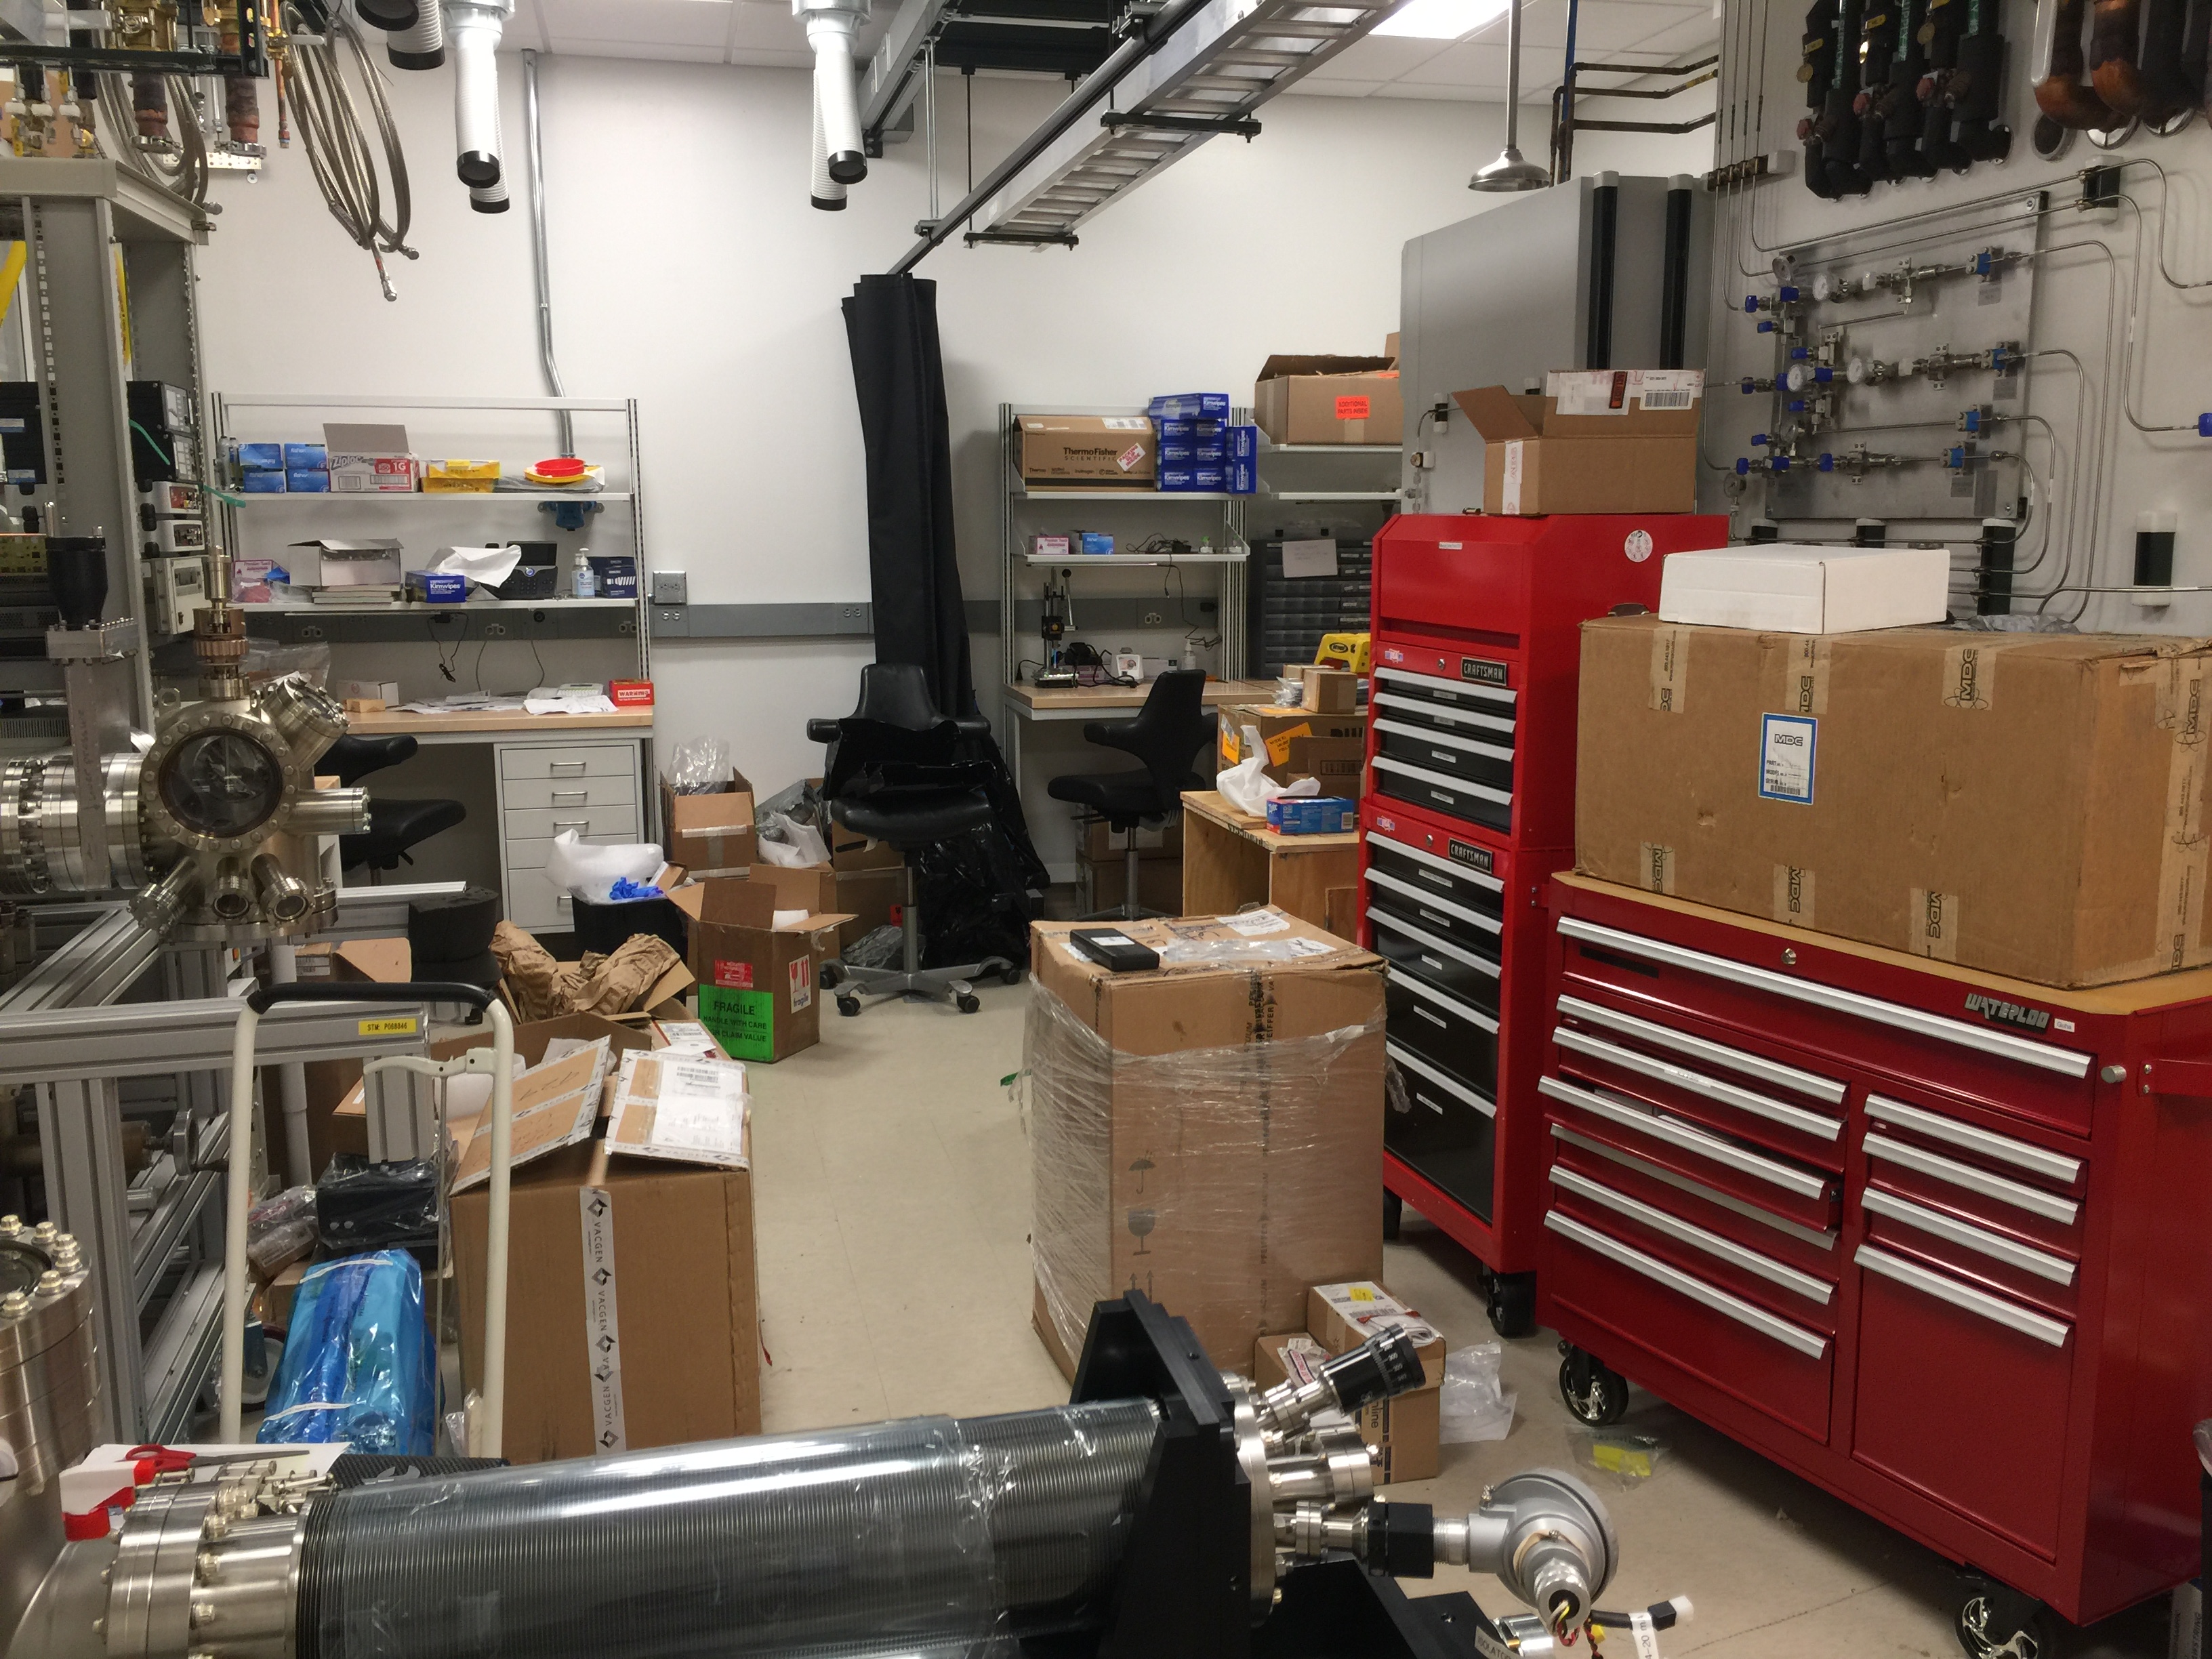 The new lab space is under construction, with the infrastructure of the room (gas sources, power, exhuast, etc.) all recently completed.  Now the two vacuum chambers for this room are undergoing installation -- which requires unpacking a lot of boxes!